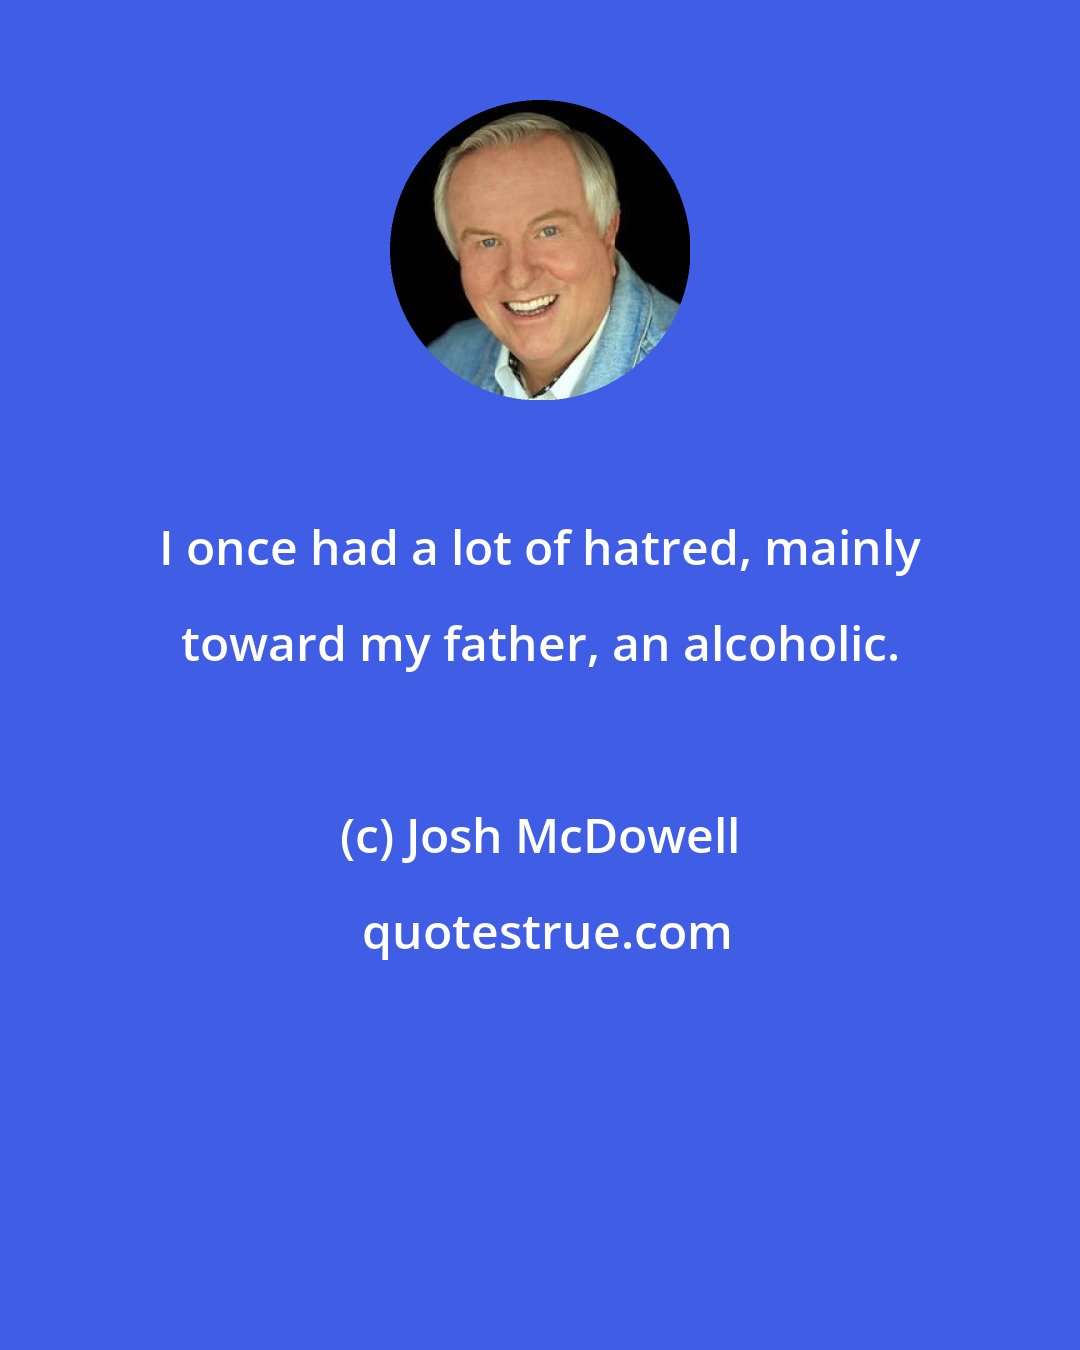 Josh McDowell: I once had a lot of hatred, mainly toward my father, an alcoholic.